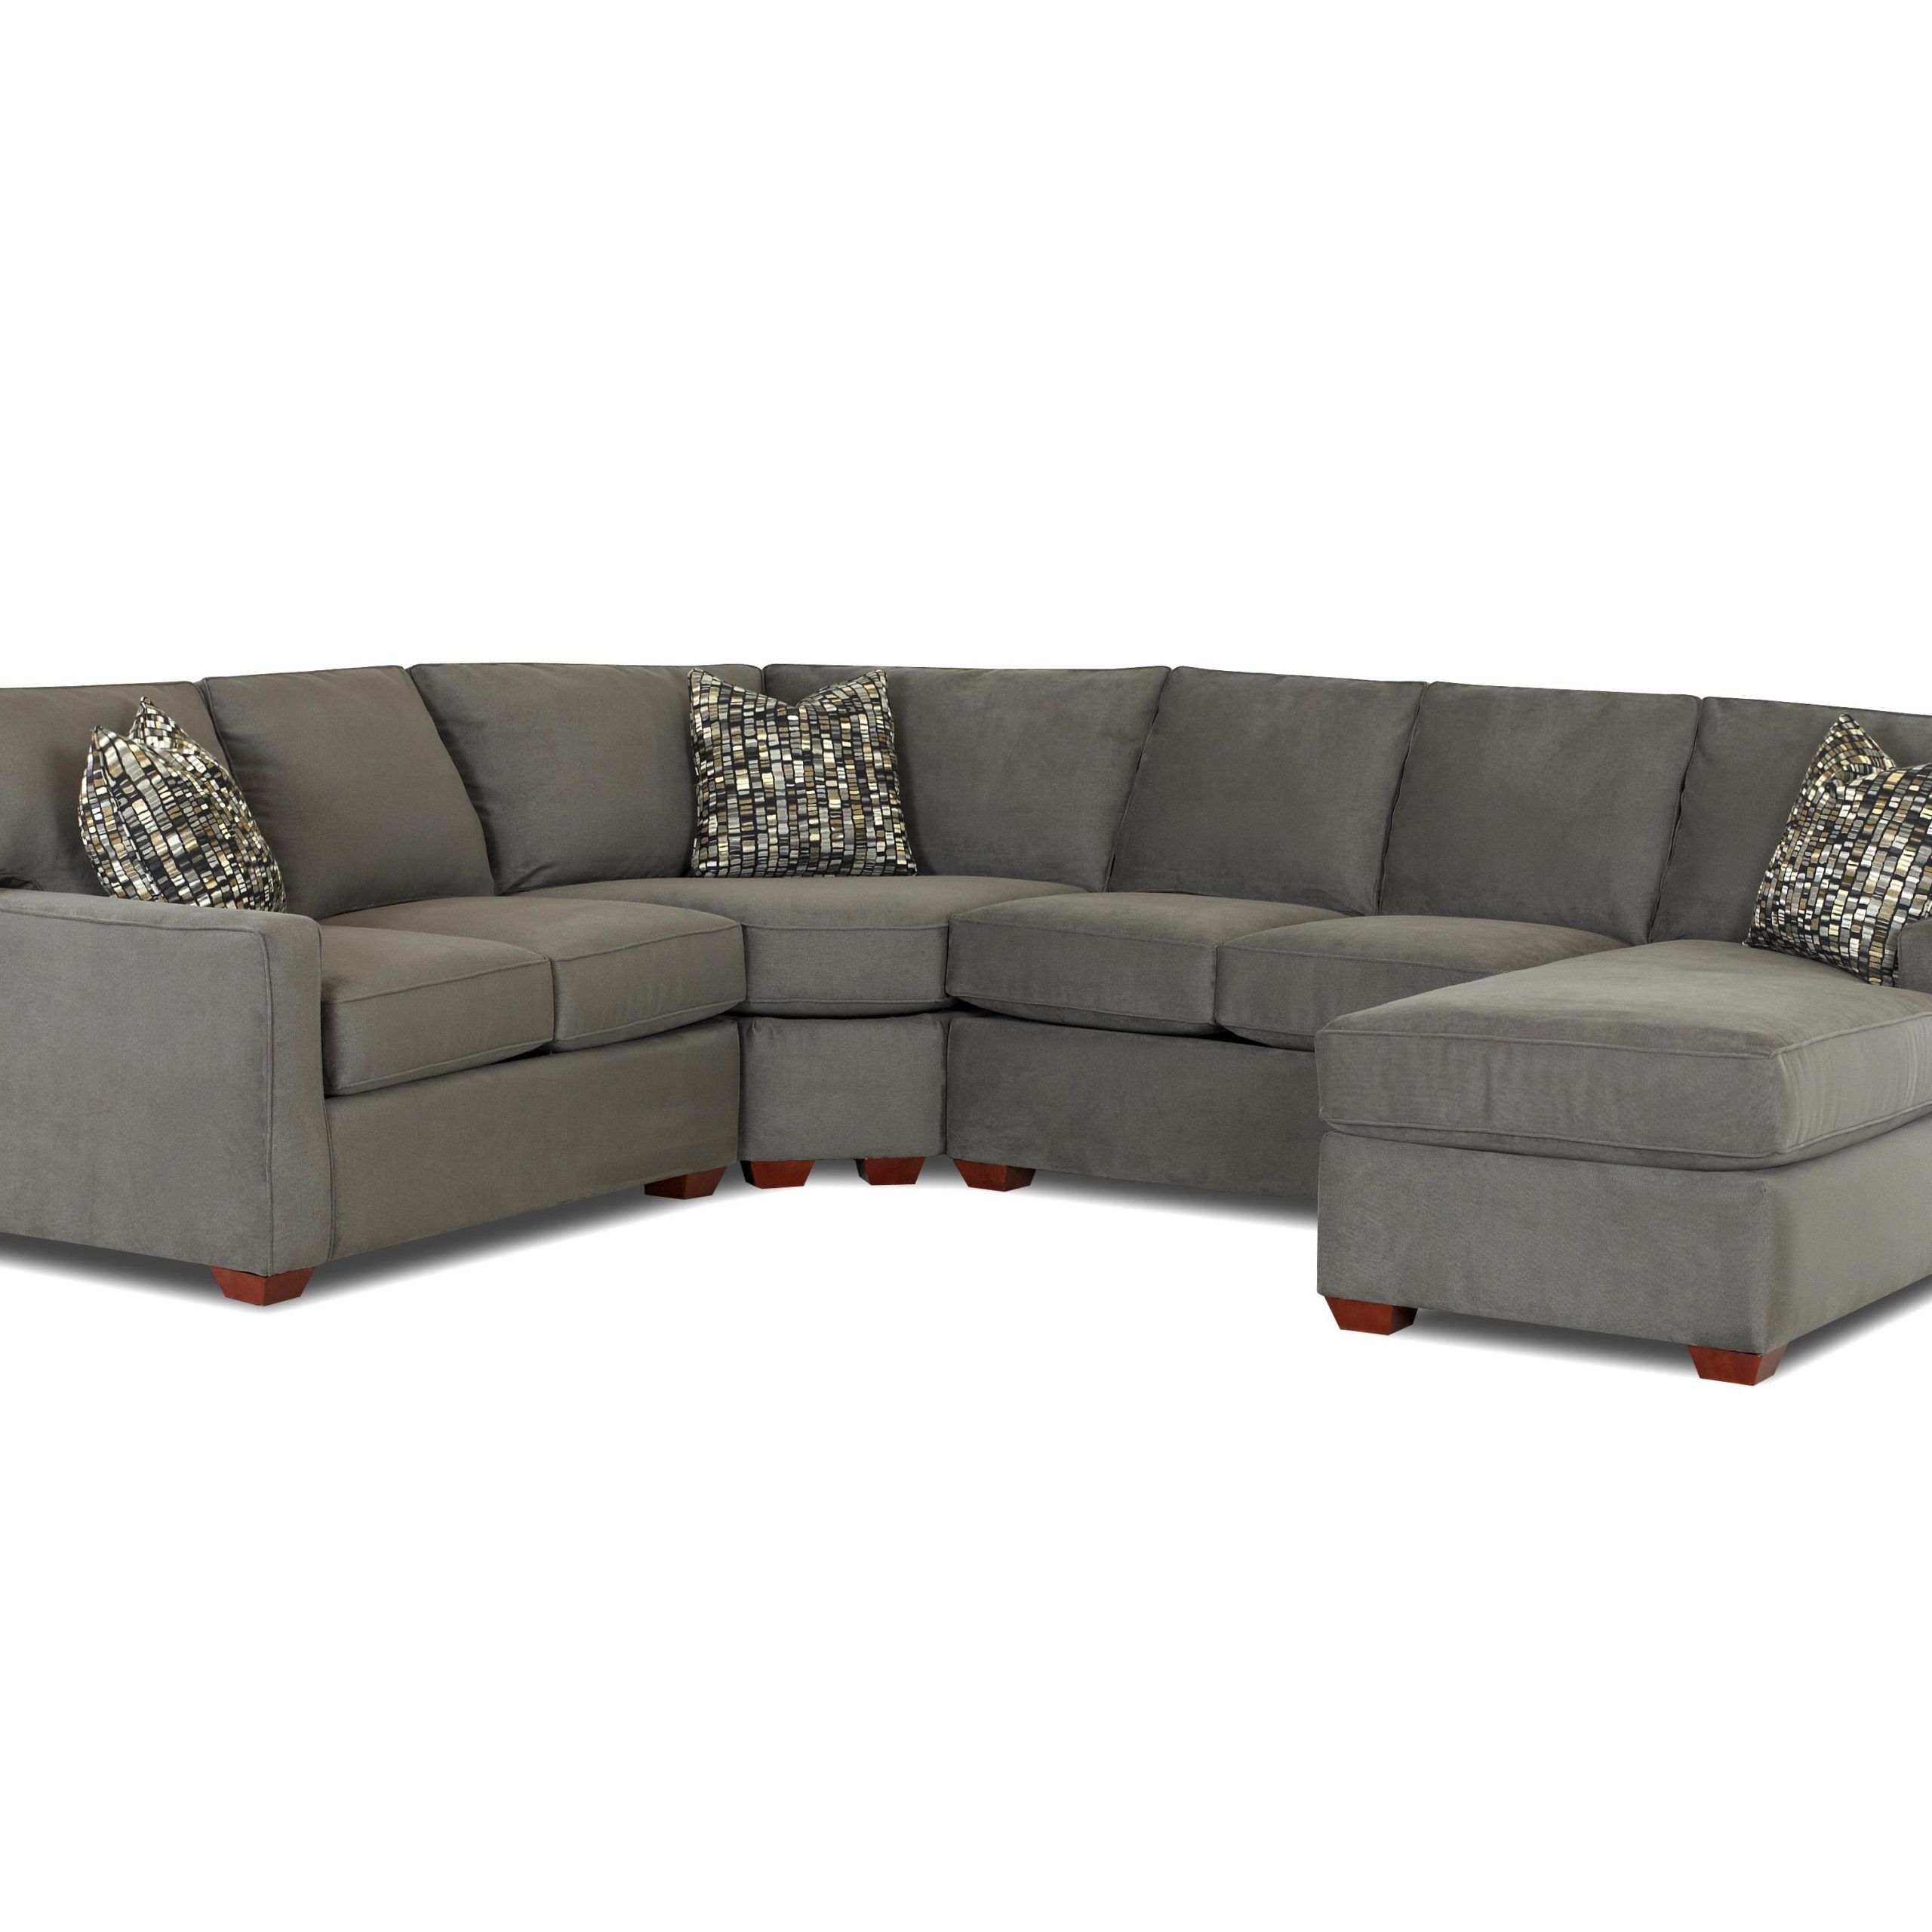 Contemporary L Shaped Sectional Sofa With Right Arm Facing Chaise Intended For Modern L Shaped Sofa Sectionals (Gallery 1 of 20)